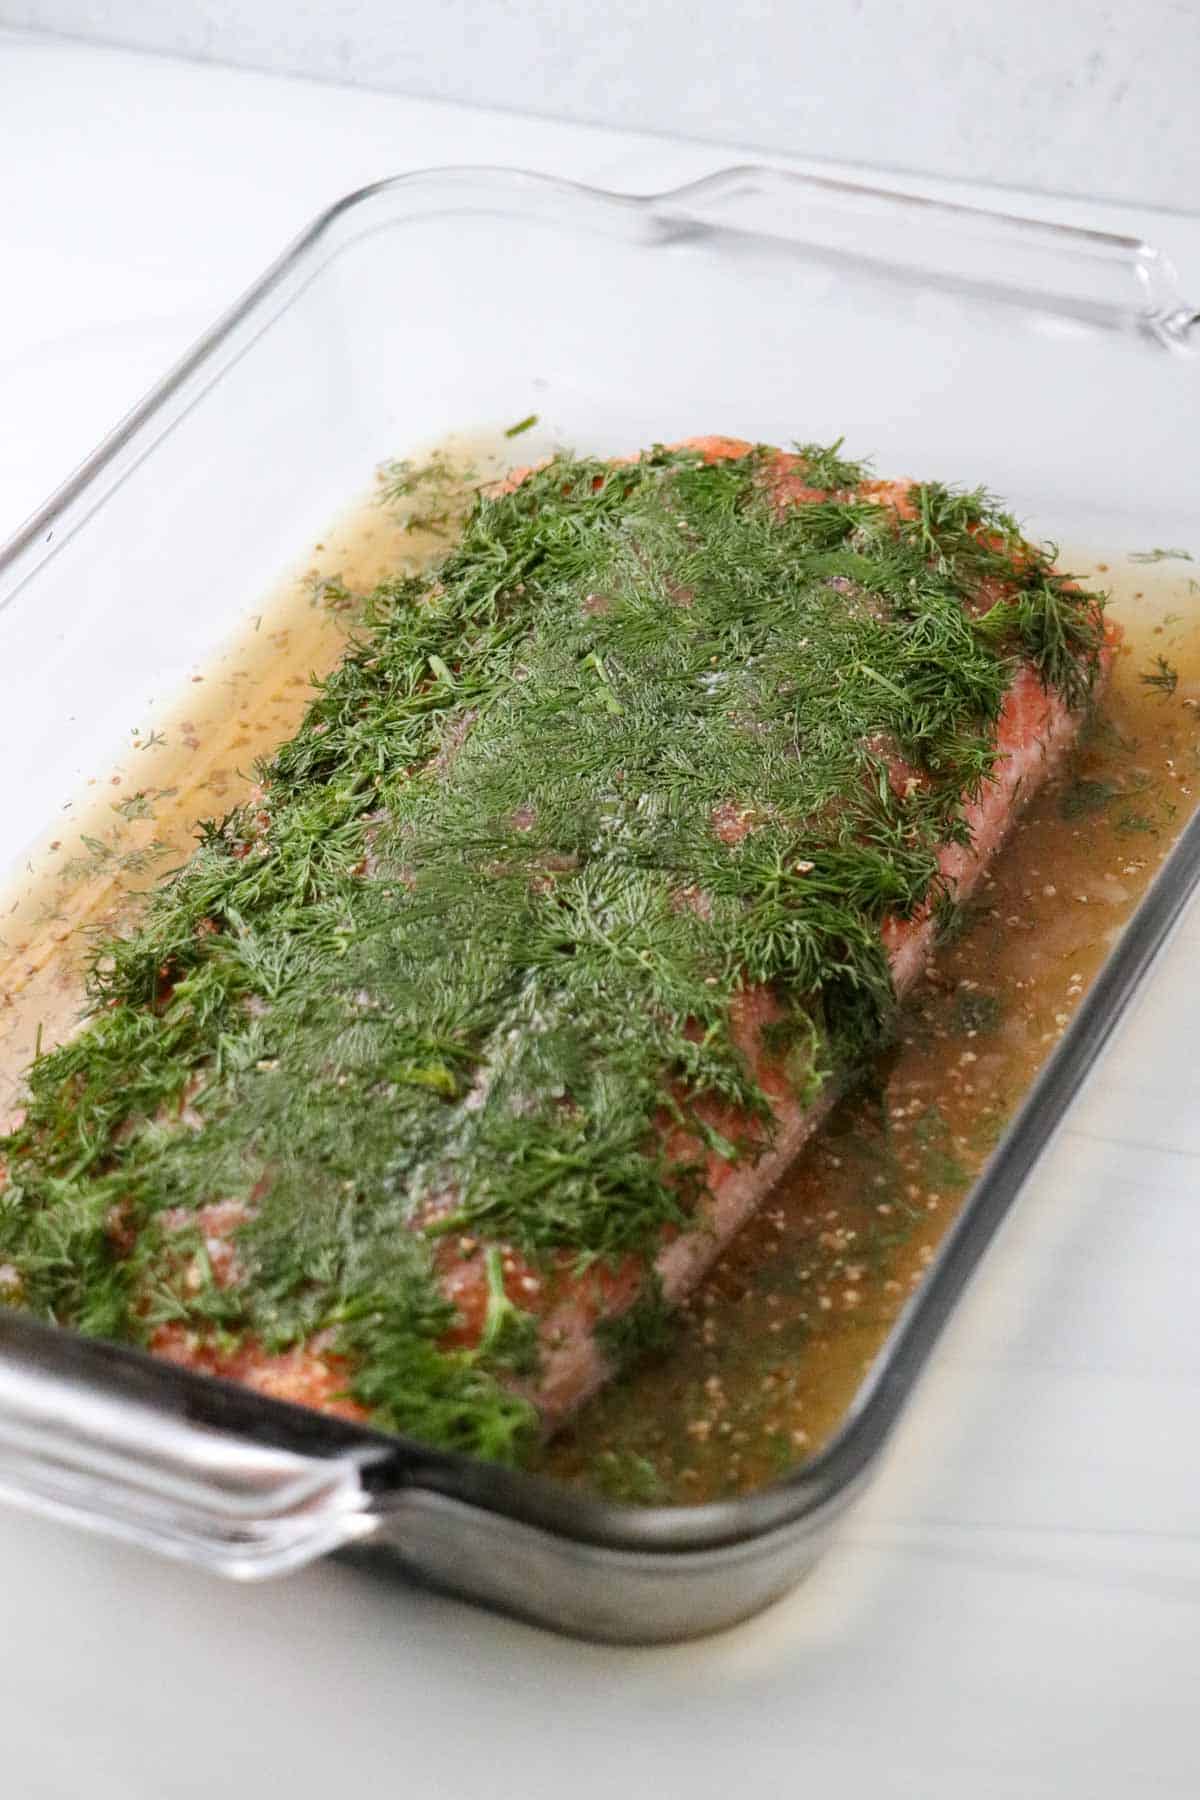 Cured salmon in a glass dish topped with chopped fresh dill.